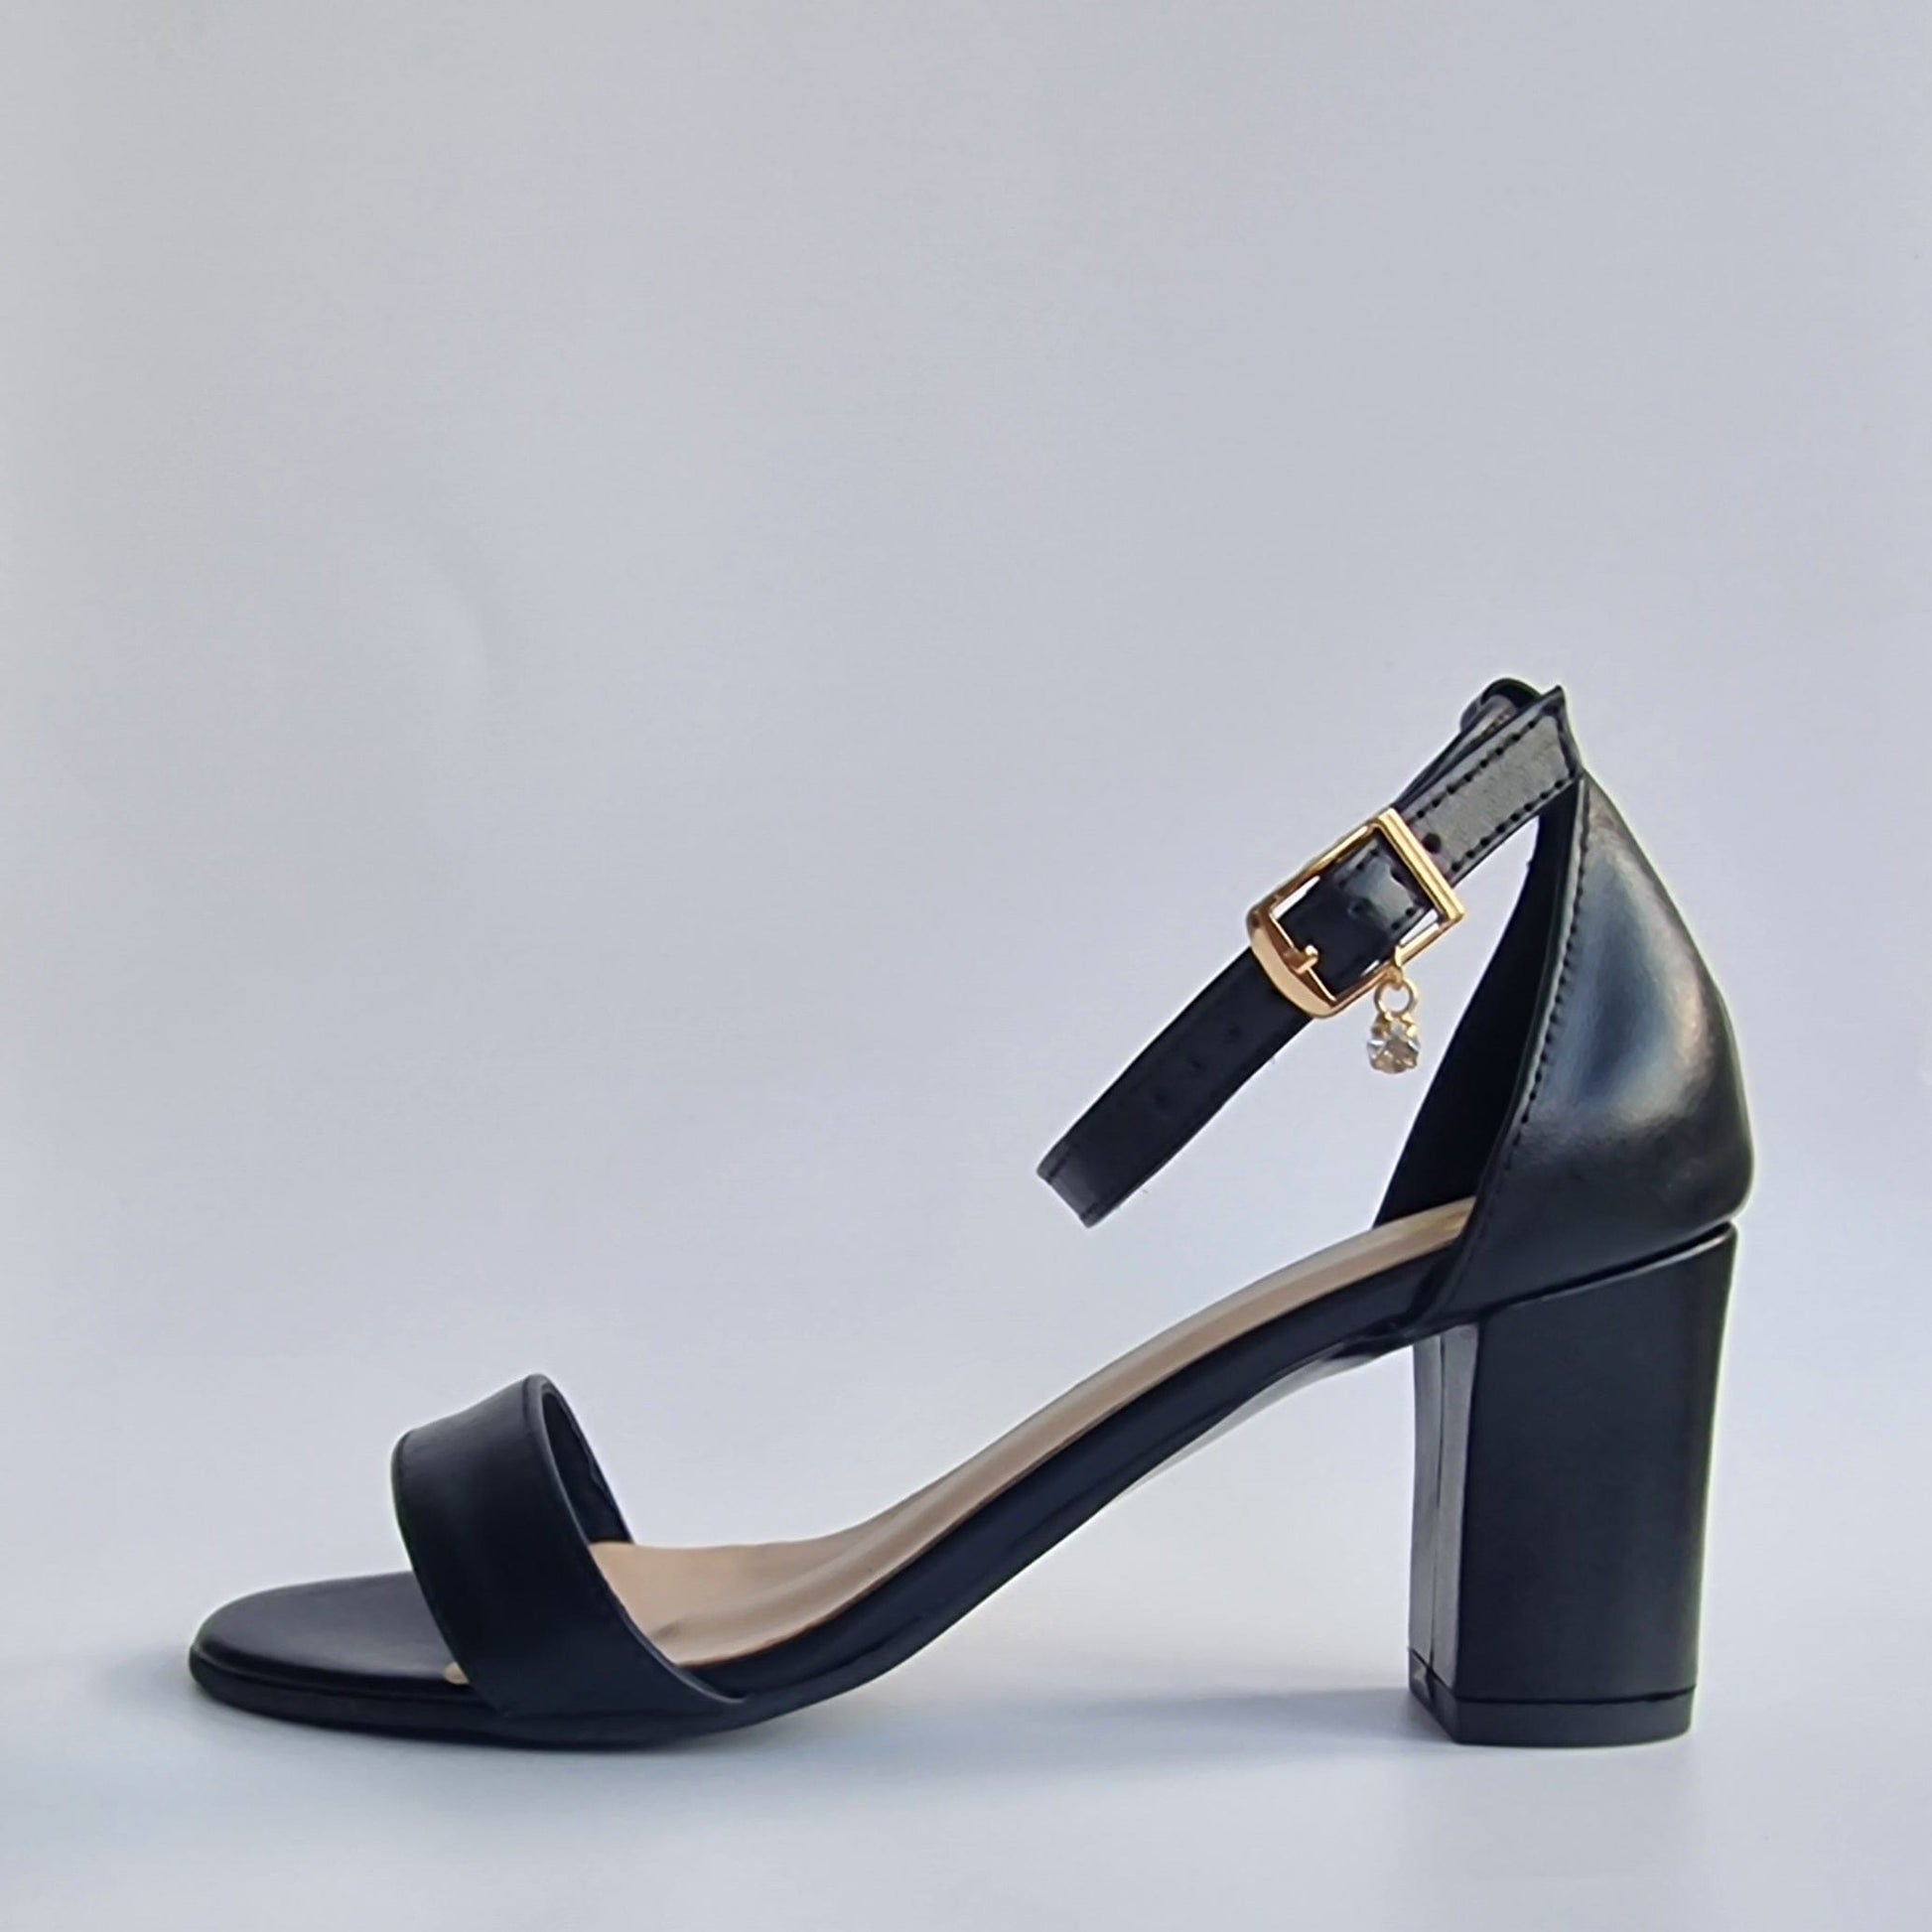 Barely there strap sandals with ankle buckle fastening 